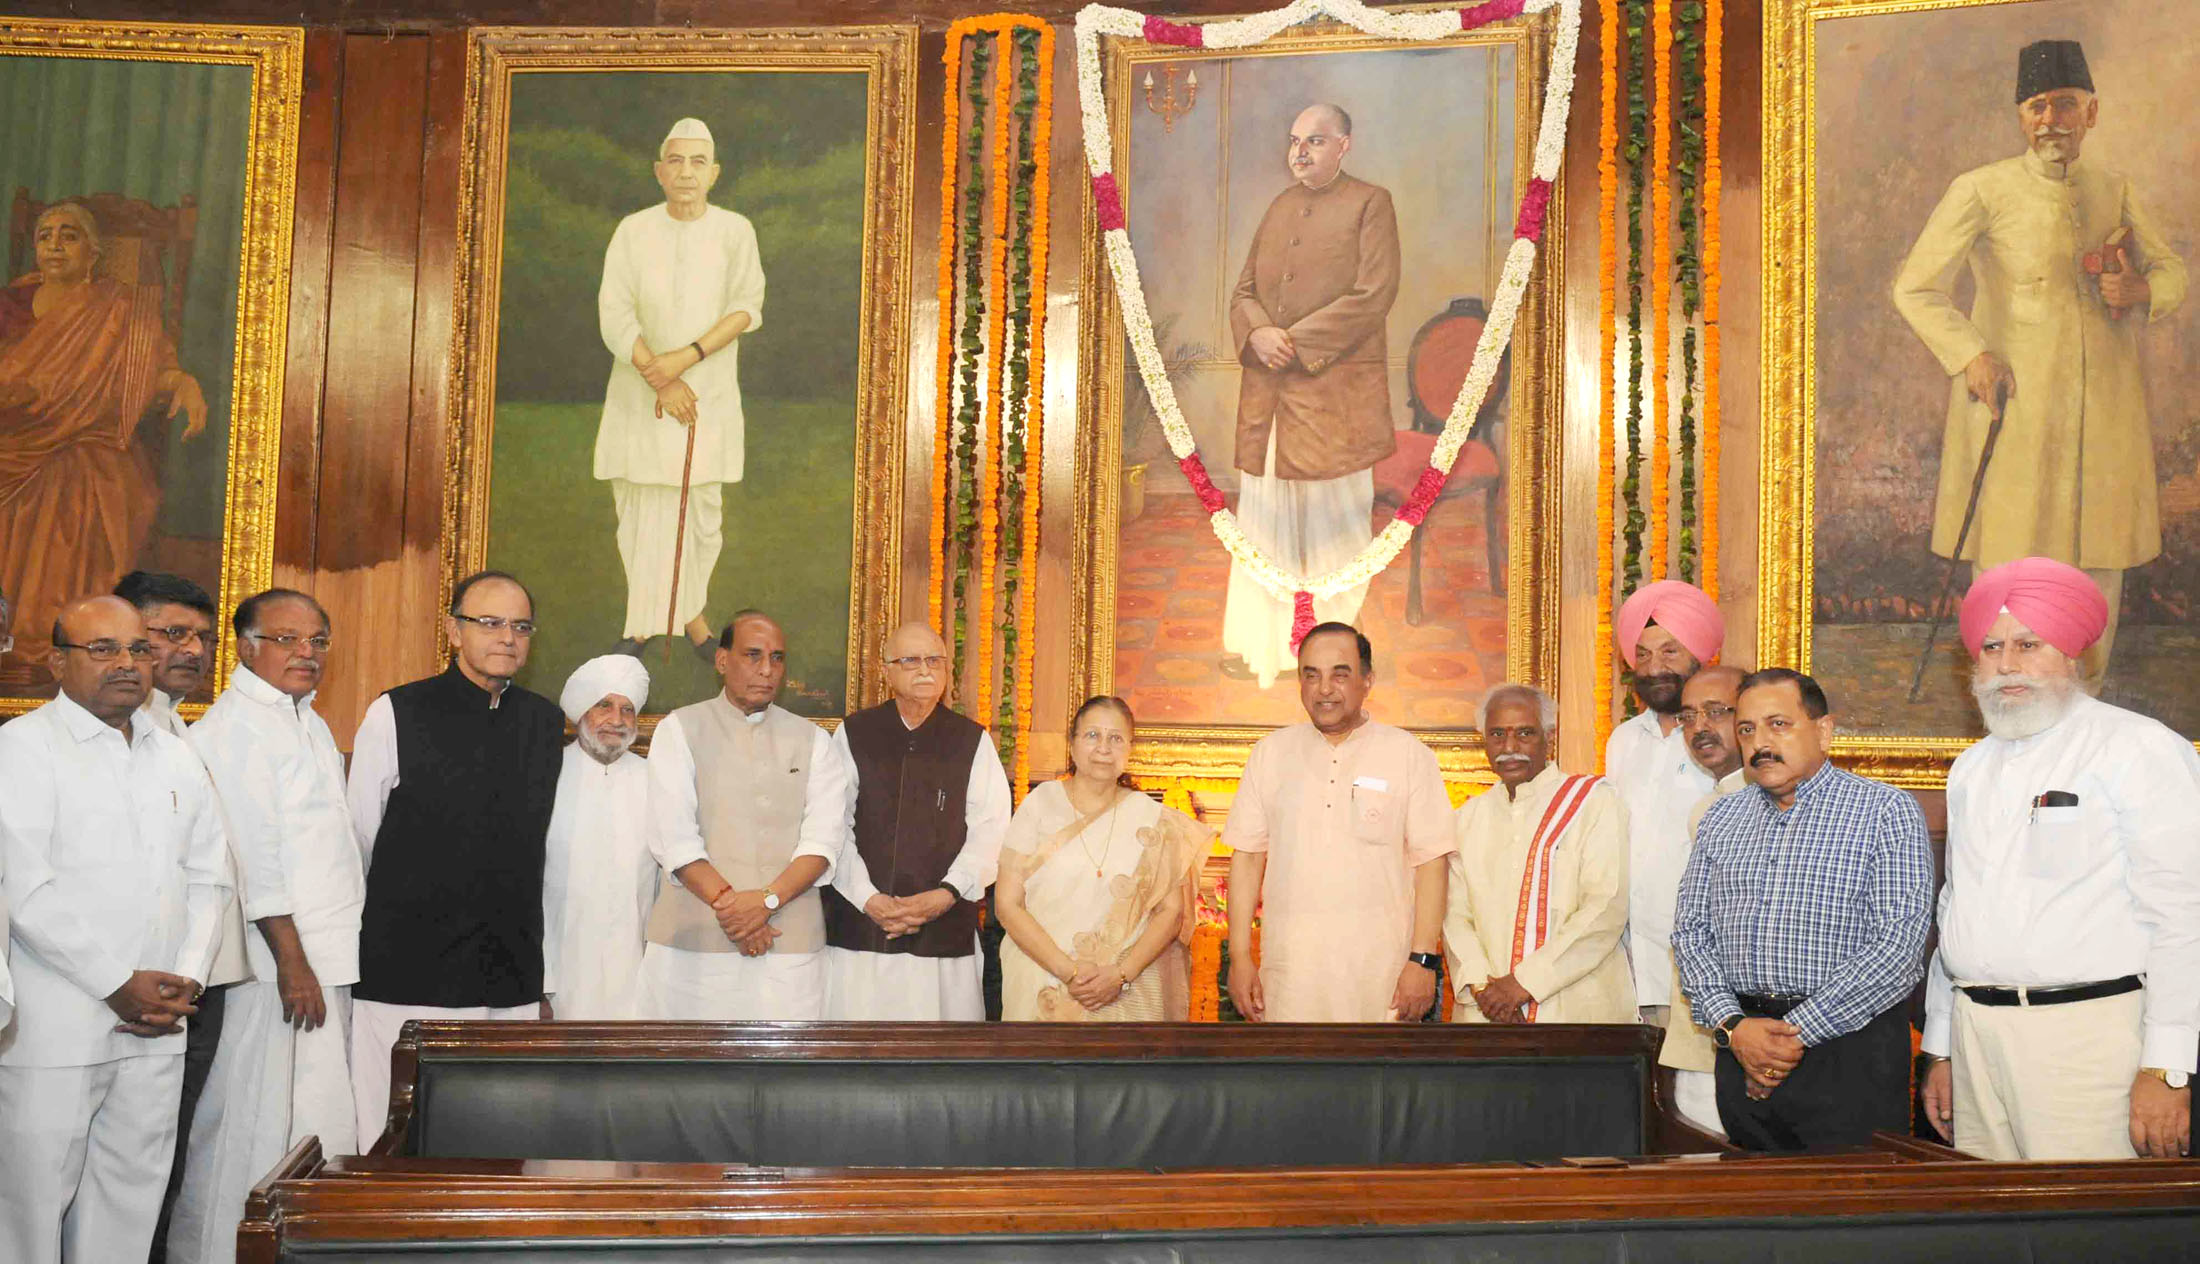 The Speaker, Lok Sabha, Smt. Sumitra Mahajan, the Union Home Minister, Shri Rajnath Singh, the Union Minister for Finance, Corporate Affairs and Information & Broadcasting, Shri Arun Jaitley, the Union Minister for Communications & Information Technology, Shri Ravi Shankar Prasad, the Union Minister for Social Justice and Empowerment, Shri Thaawar Chand Gehlot, the Minister of State for Labour and Employment (I/C), Shri Bandaru Dattatreya, the Minister of State for Development of North Eastern Region (I/C), Prime Ministers Office, Personnel, Public Grievances & Pensions, Department of Atomic Energy, Department of Space, Dr. Jitendra Singh and other dignitaries paid floral tributes to Dr. Syama Prasad Mookerjee, on the occasion of his birth anniversary, in Central Hall of Parliament, in New Delhi on July 06, 2015.